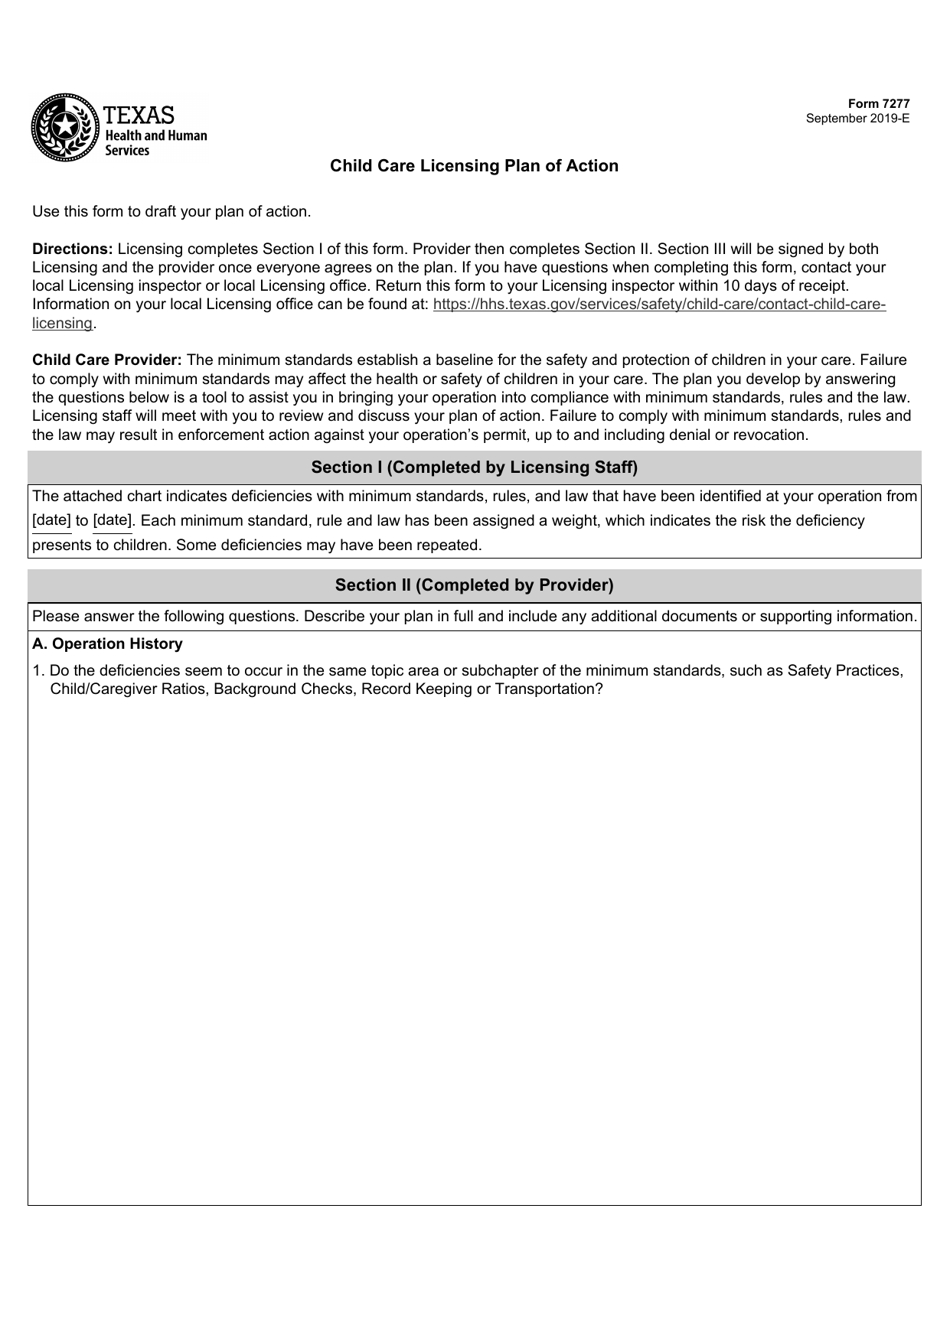 Form 7277 Child Care Licensing Plan of Action - Texas, Page 1